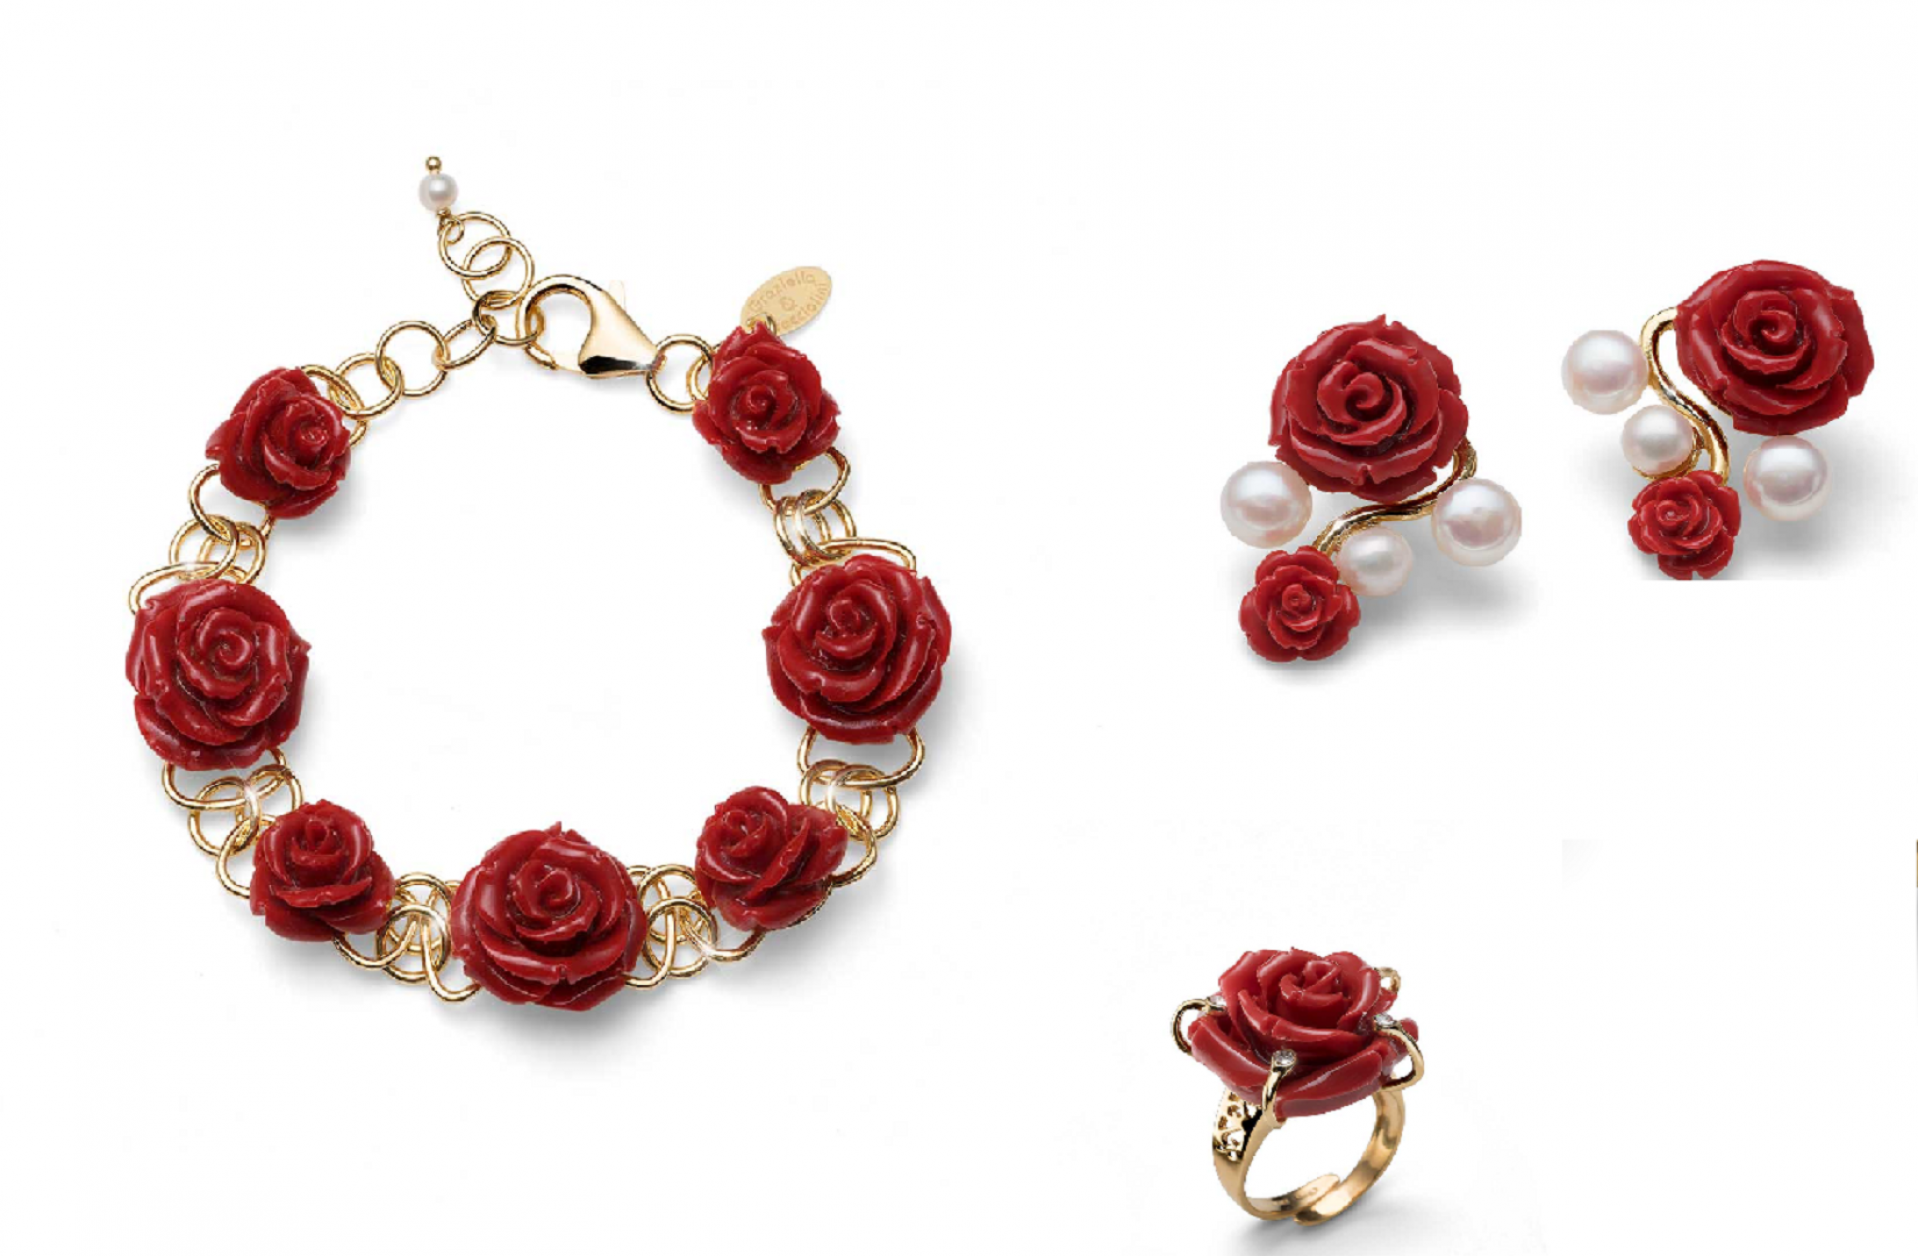 set of gold earrings, ring and bracelet with red roses and white pearls